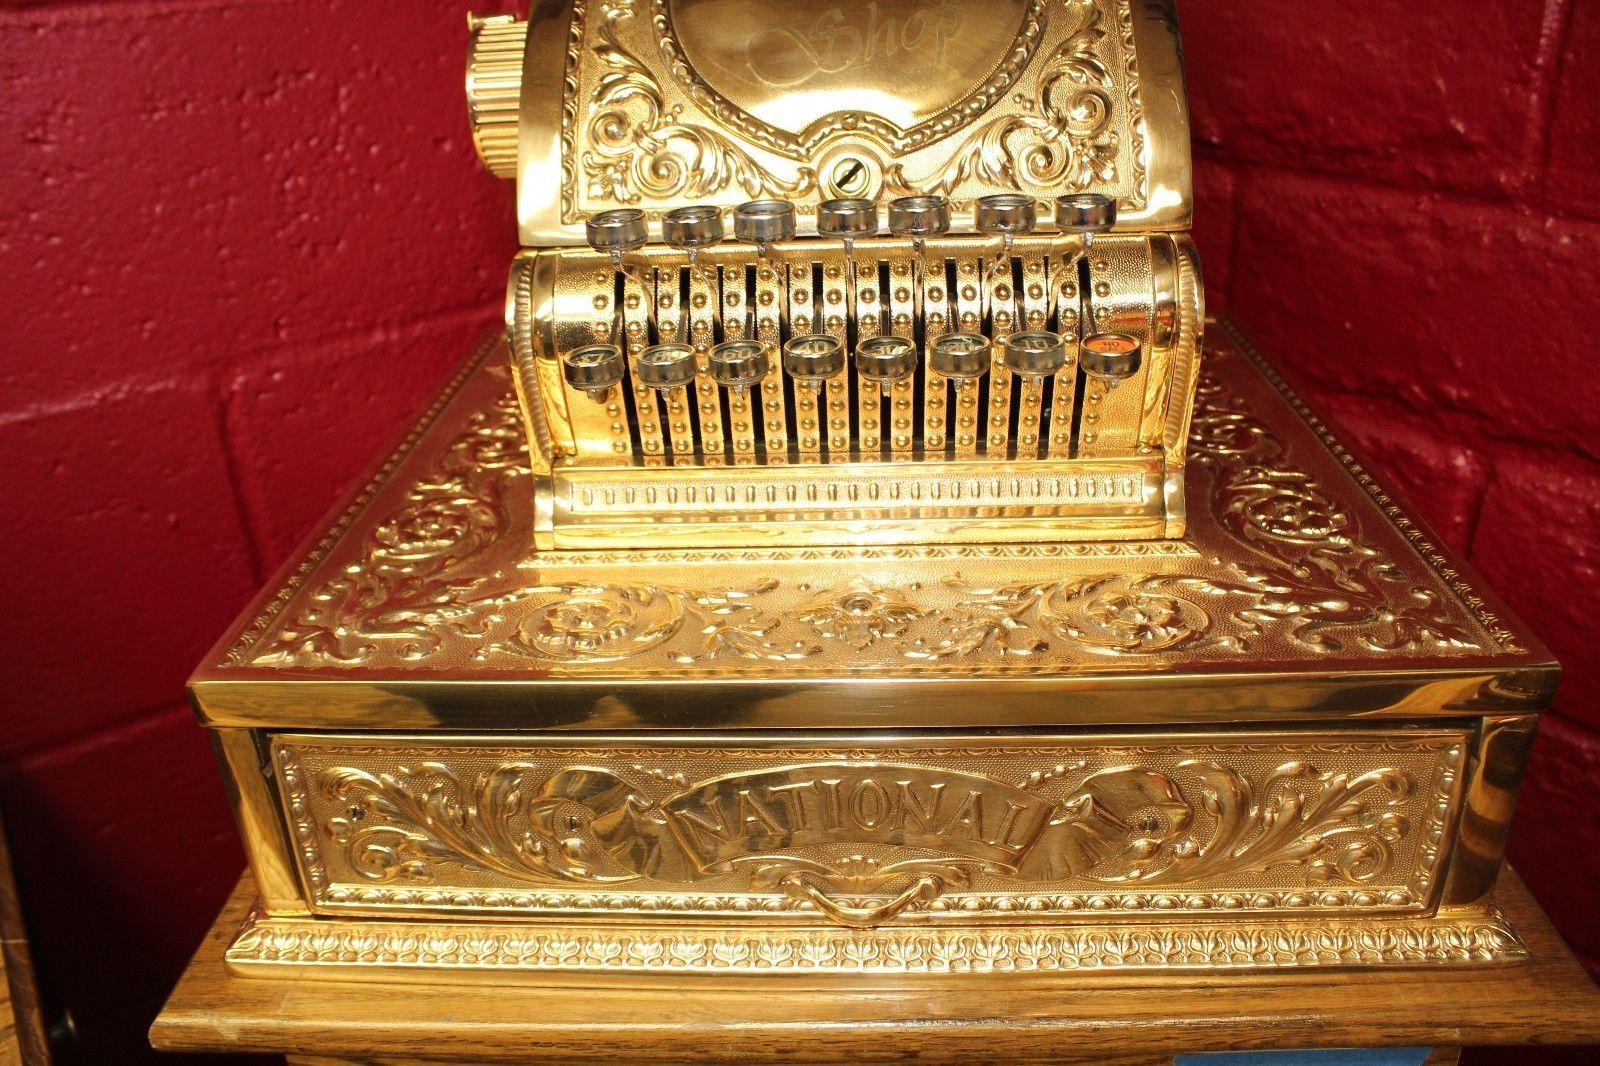 In the early 1900s, elaborate brass registers were made. Cash registers became staples in most retail stores, and to provide stronger security measures, cash registers were made with elaborate cast-metal cases from 1888-1915. 
This red brass model